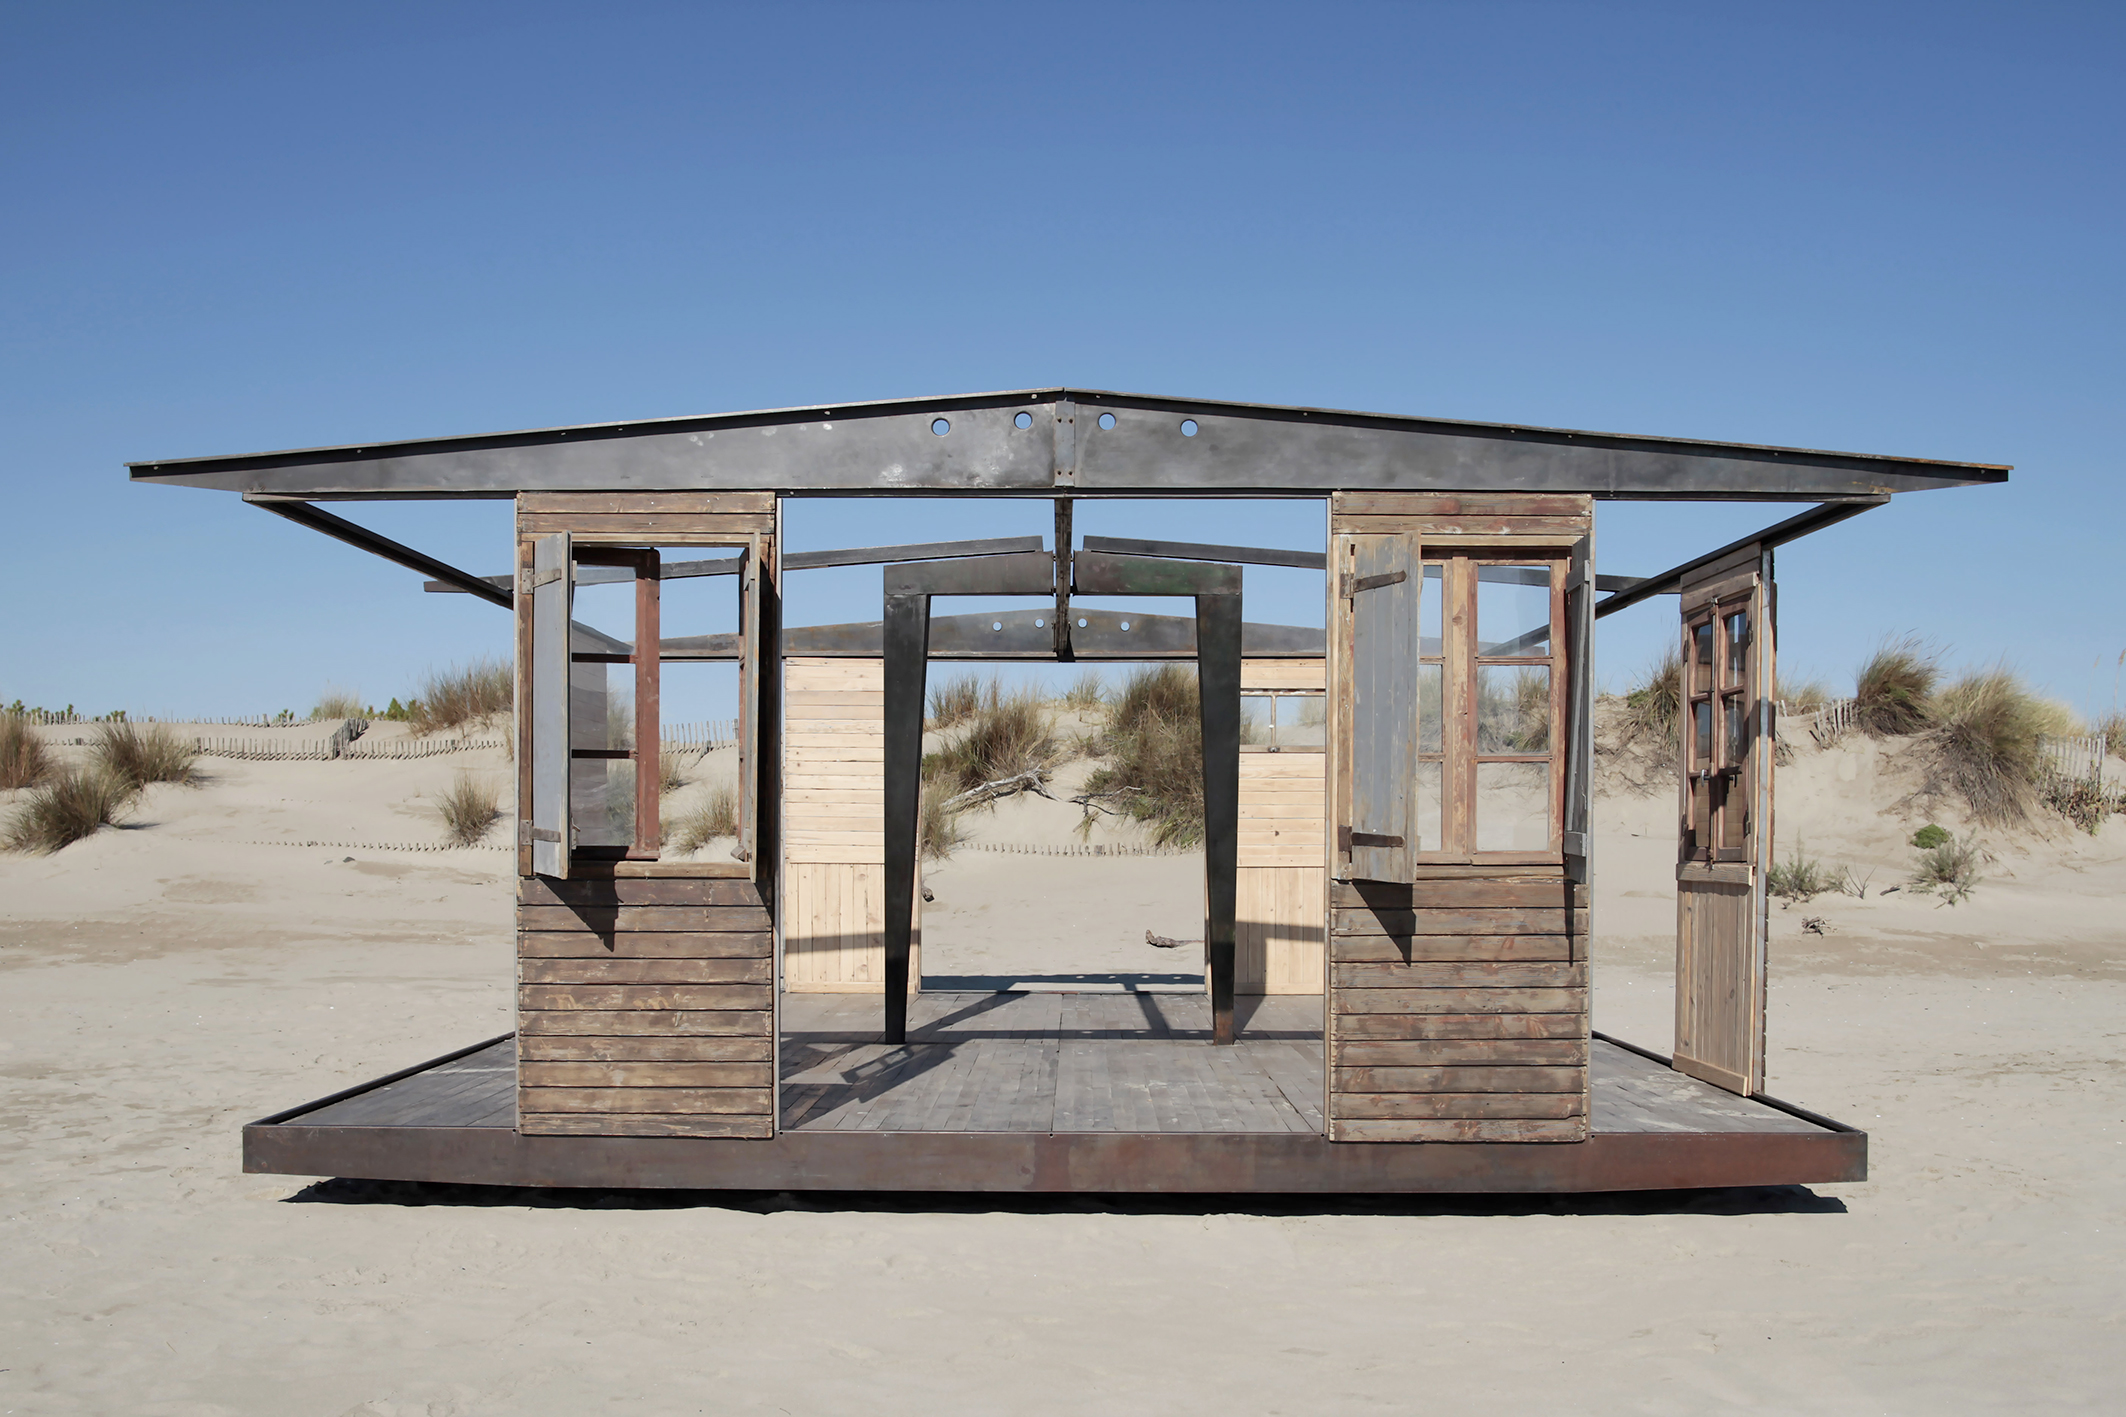 6x6 Demountable house, 1944. Reassembled in the Camargue, 2014.